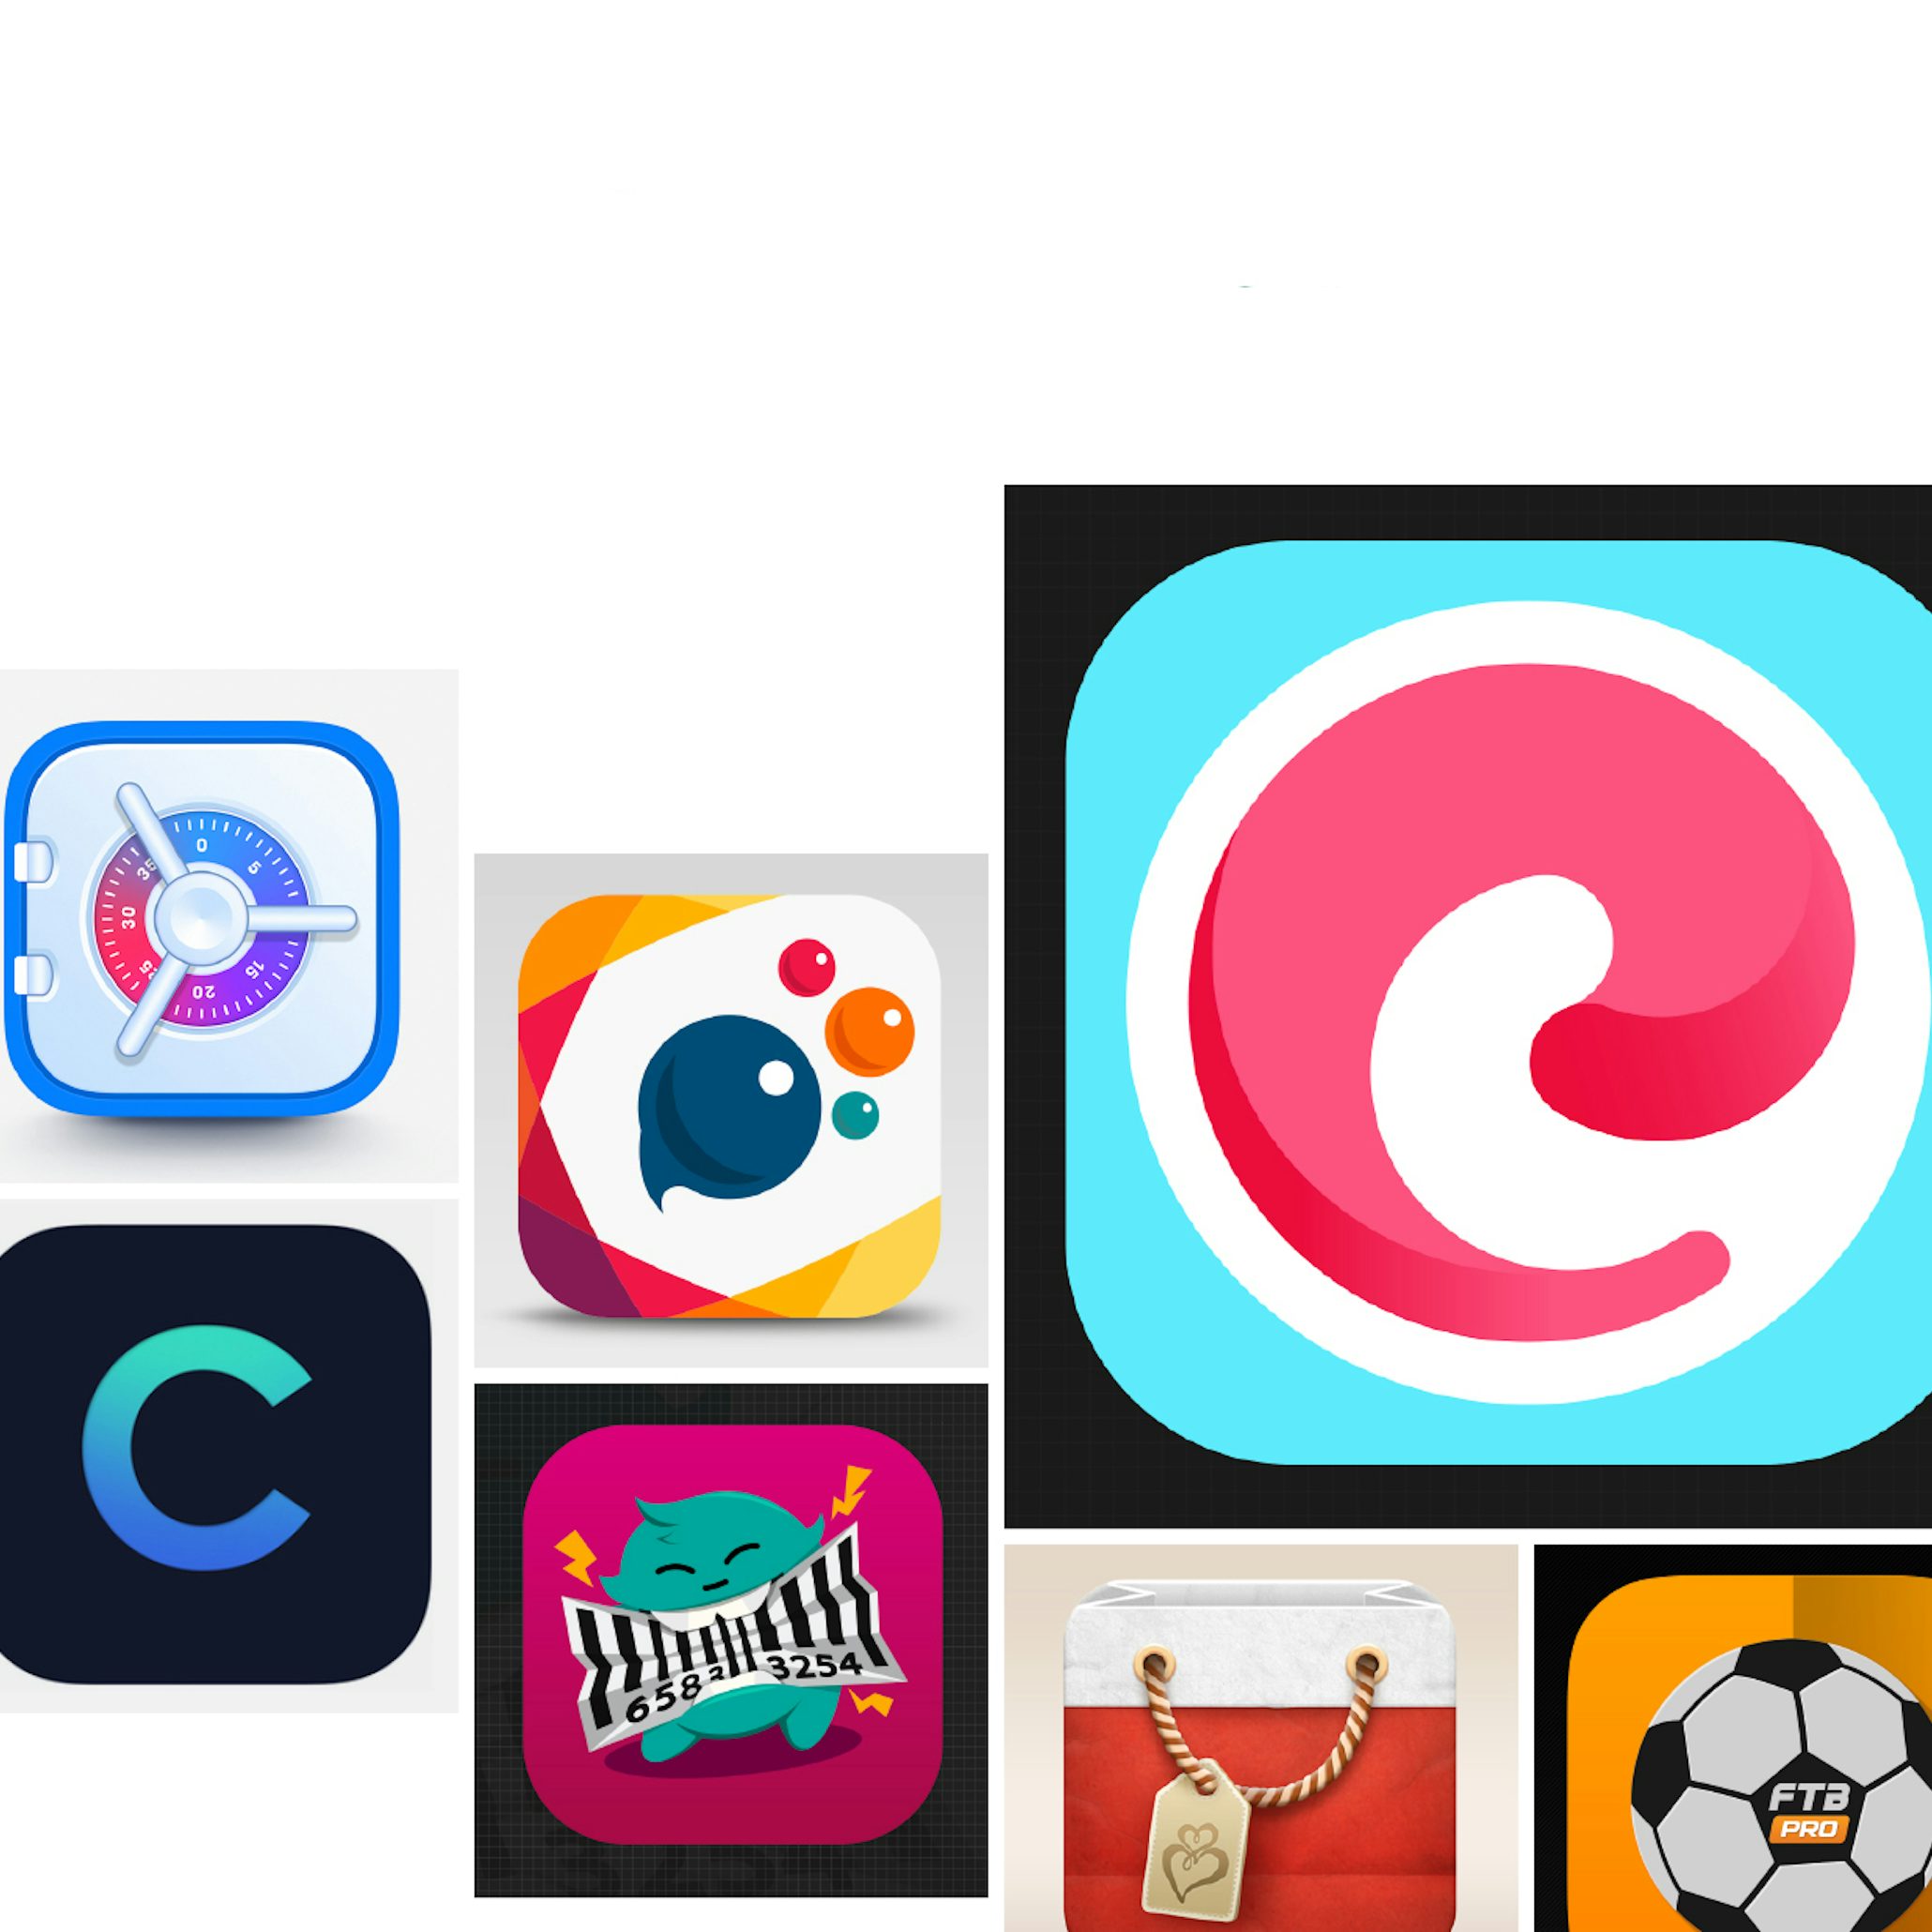 28 Awesome App Icons For Inspiration - 99Designs